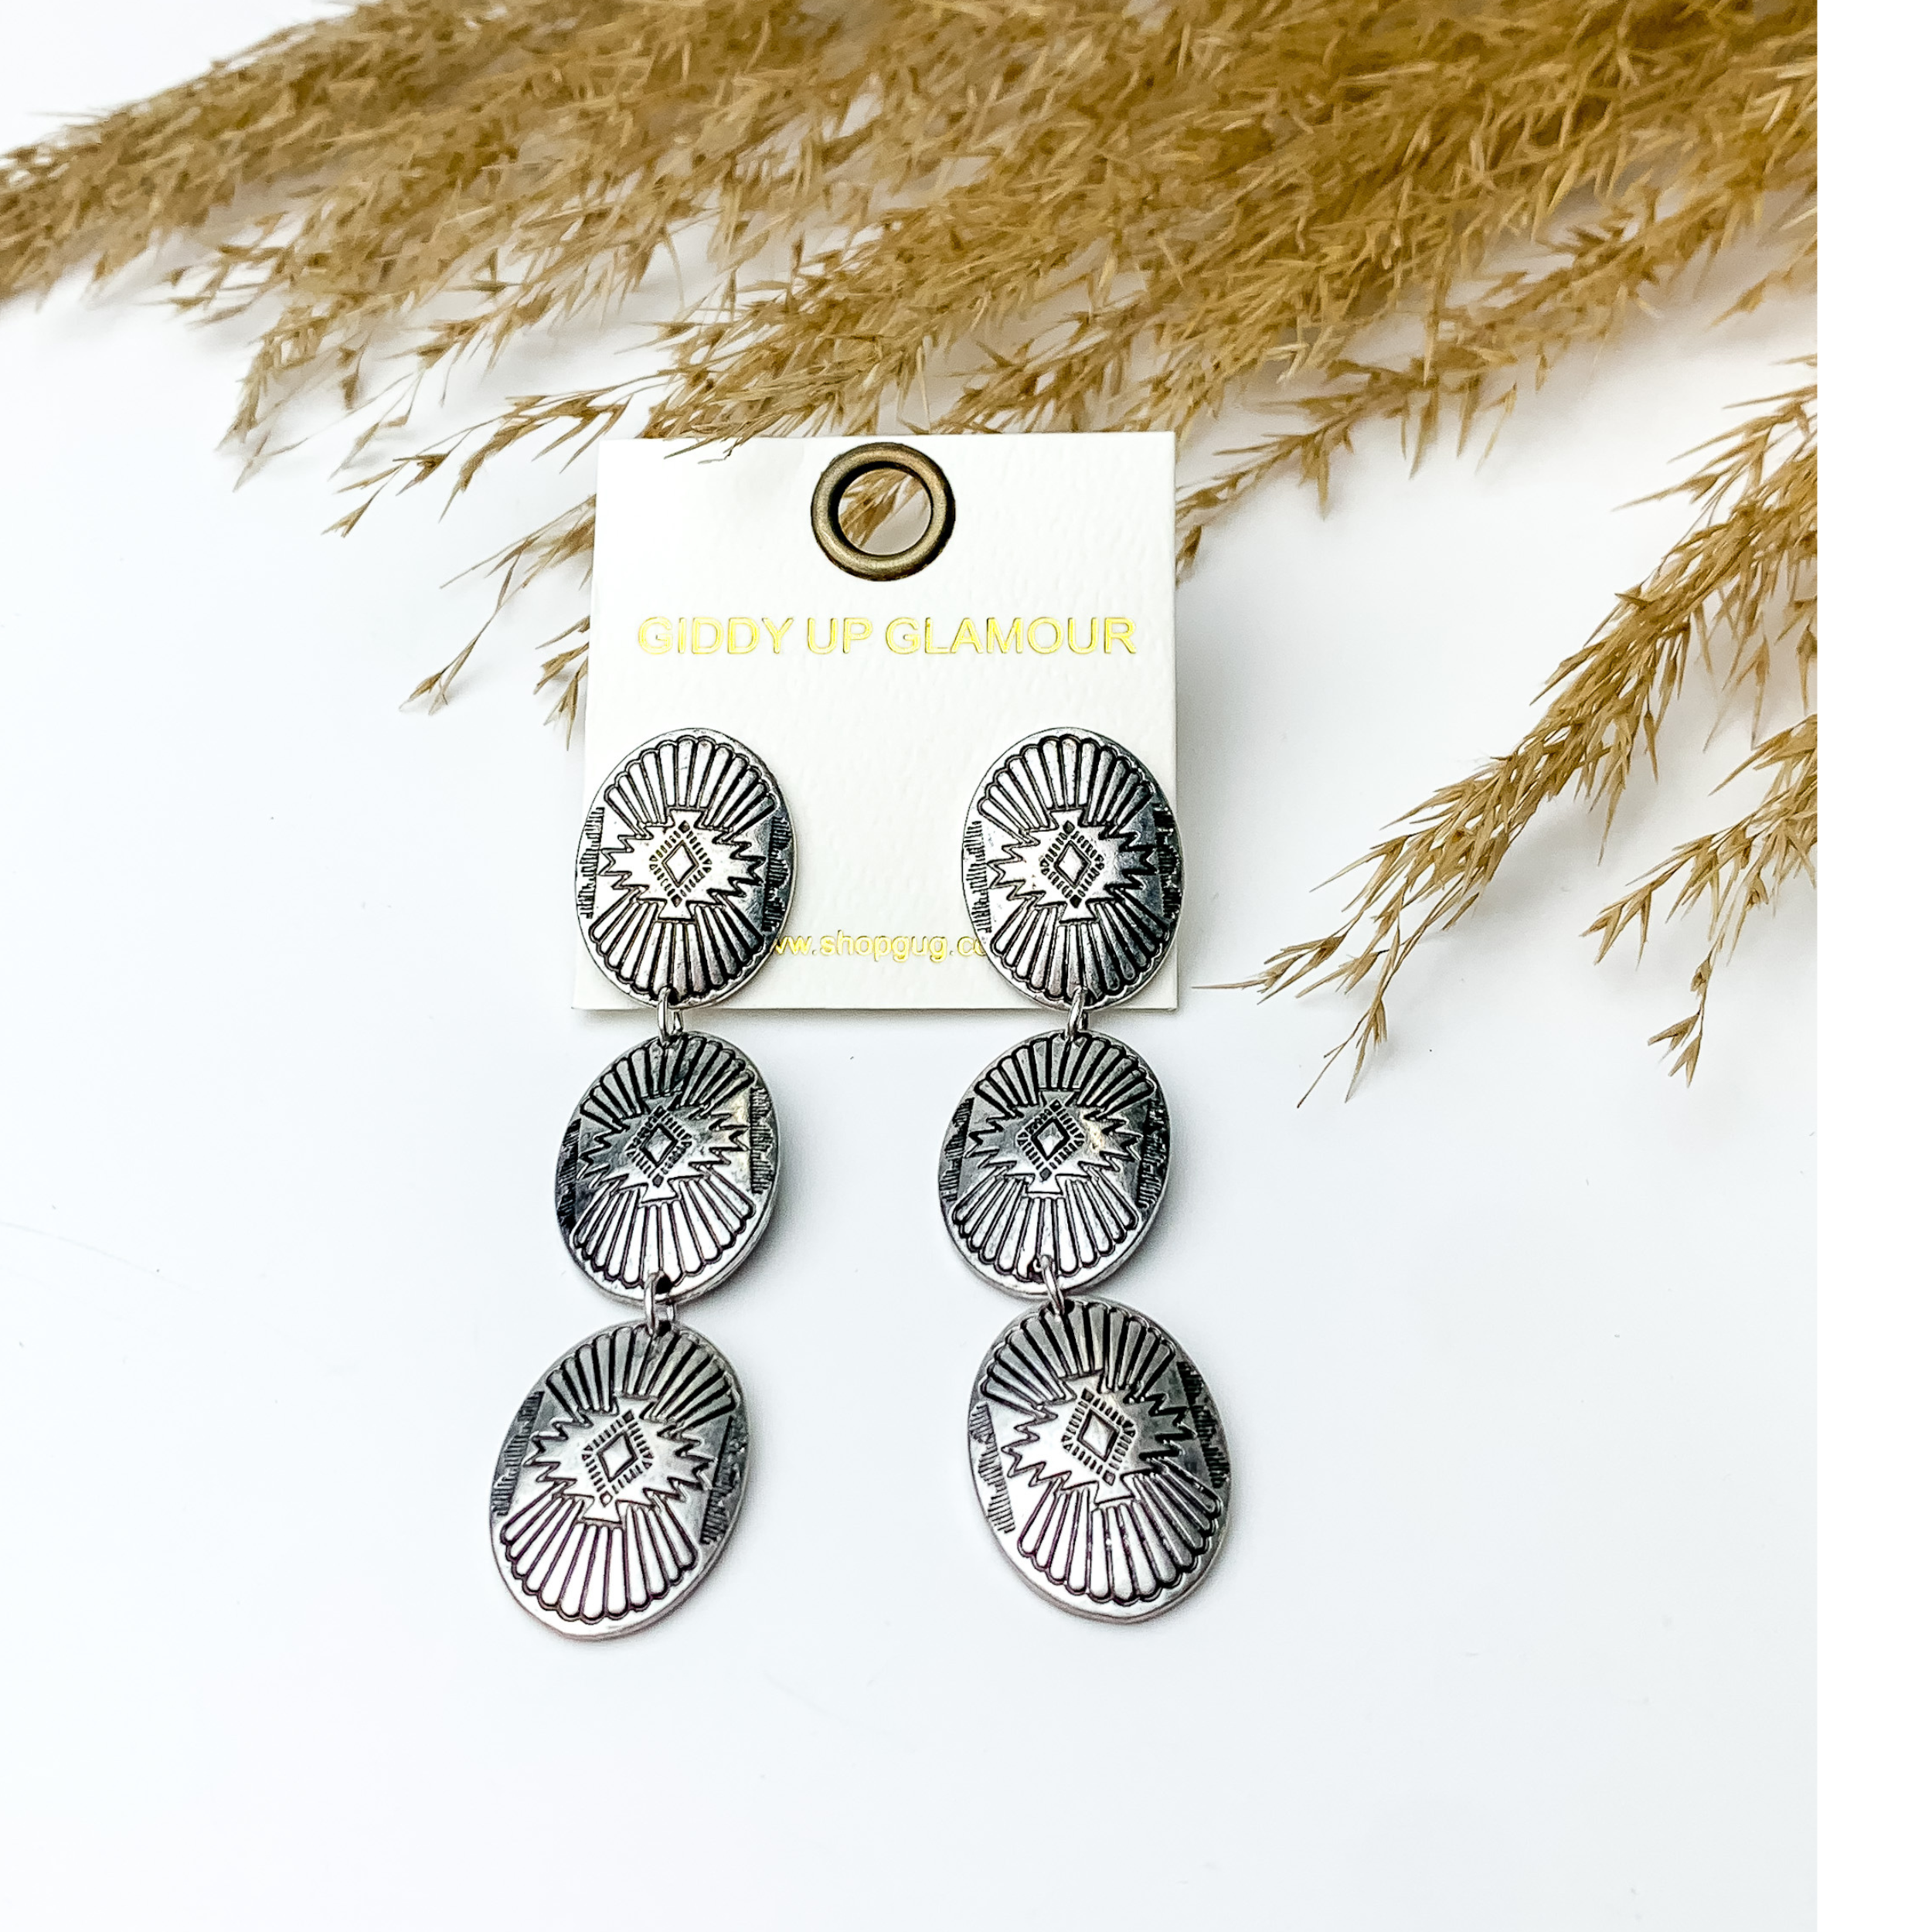 western design concho drop earrings in Silver tone pictured with pampas grass, on a white background. 